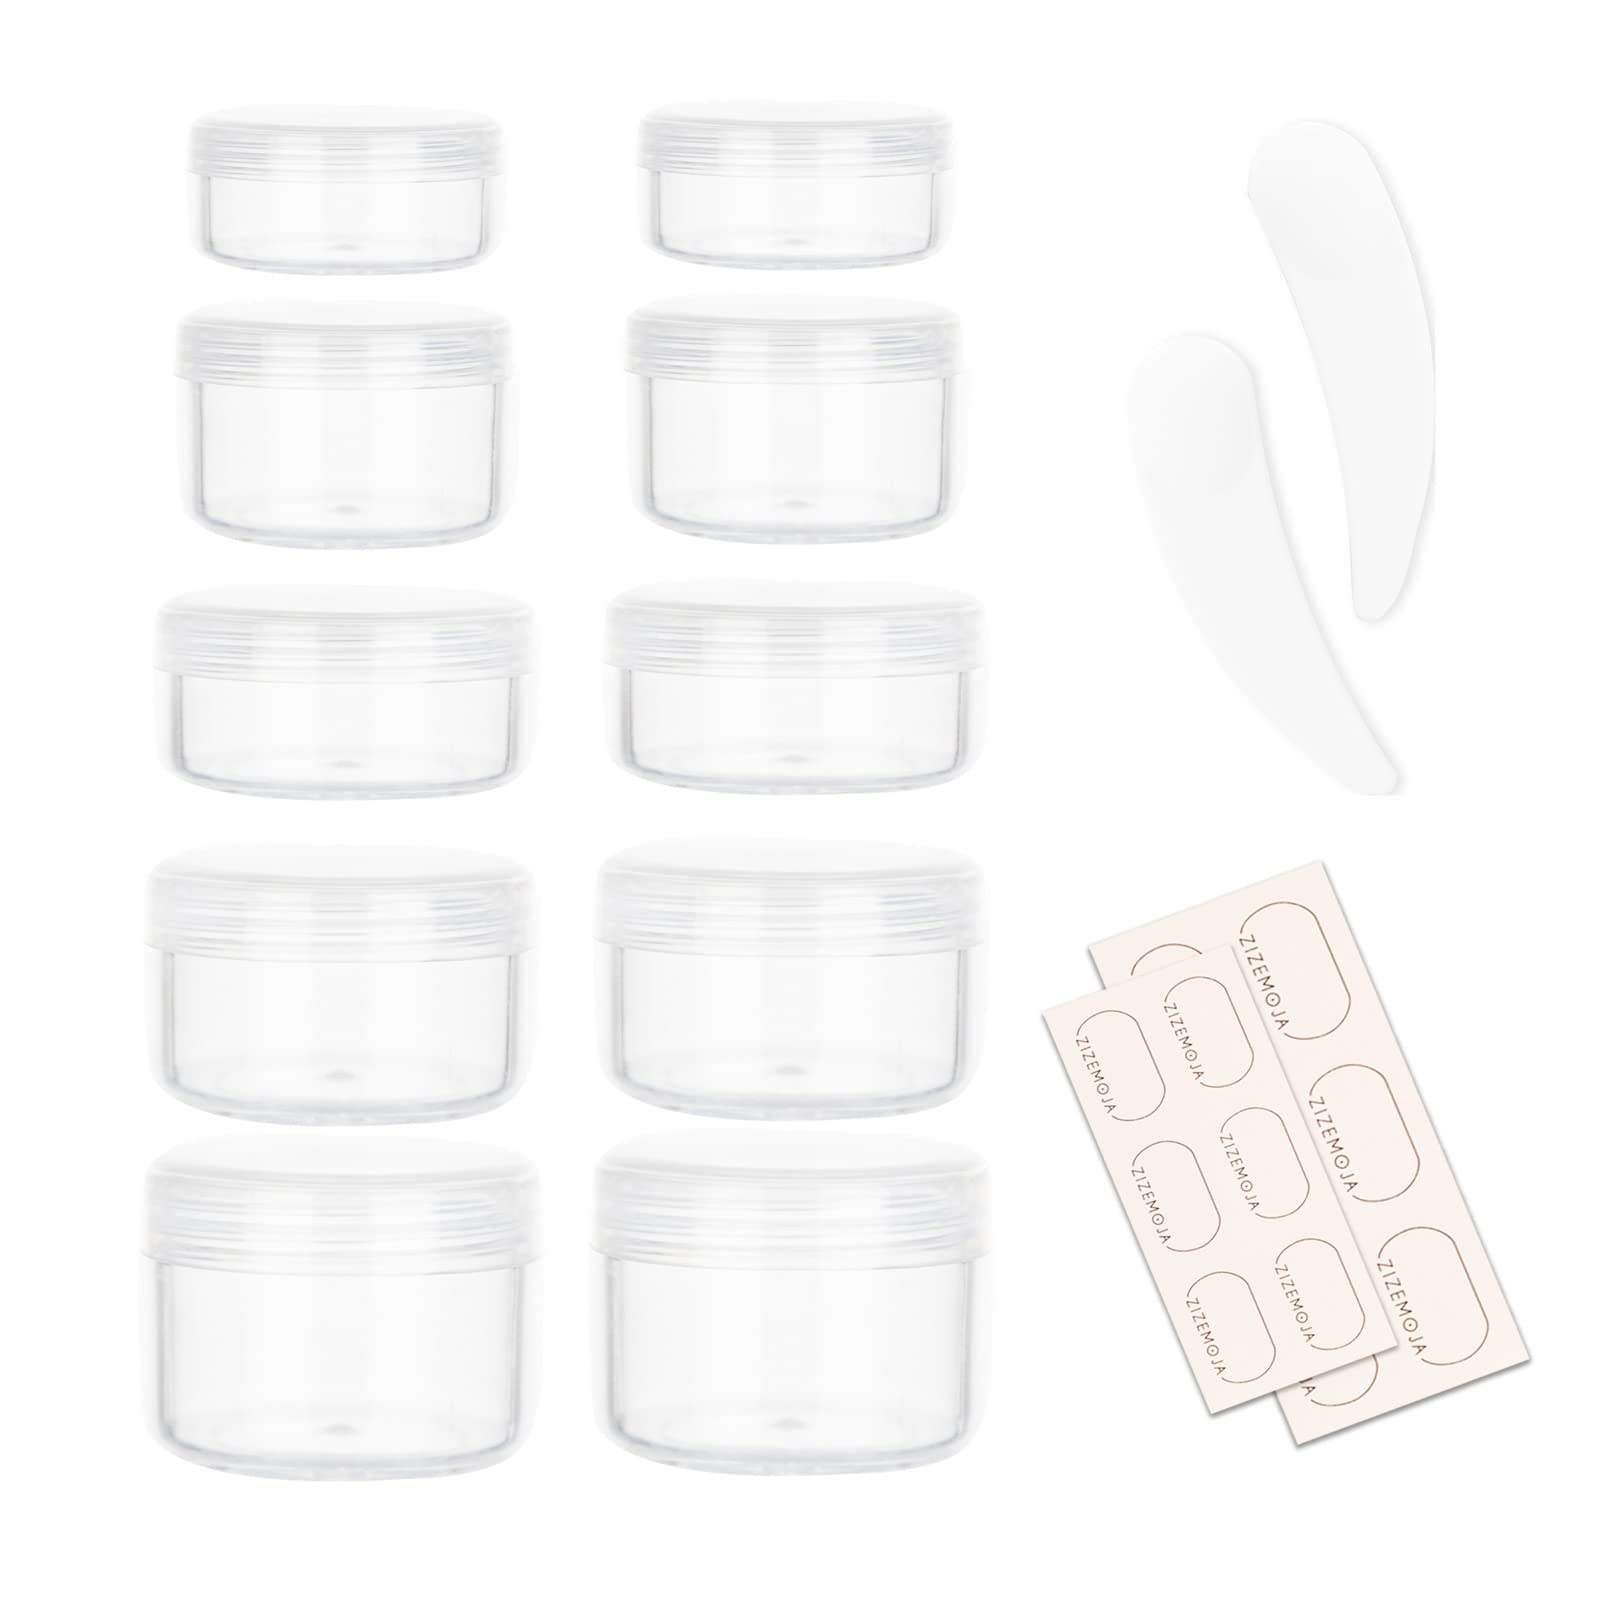 1 Travel Spice Containers, Shaker Jars, Clear Plastic Container